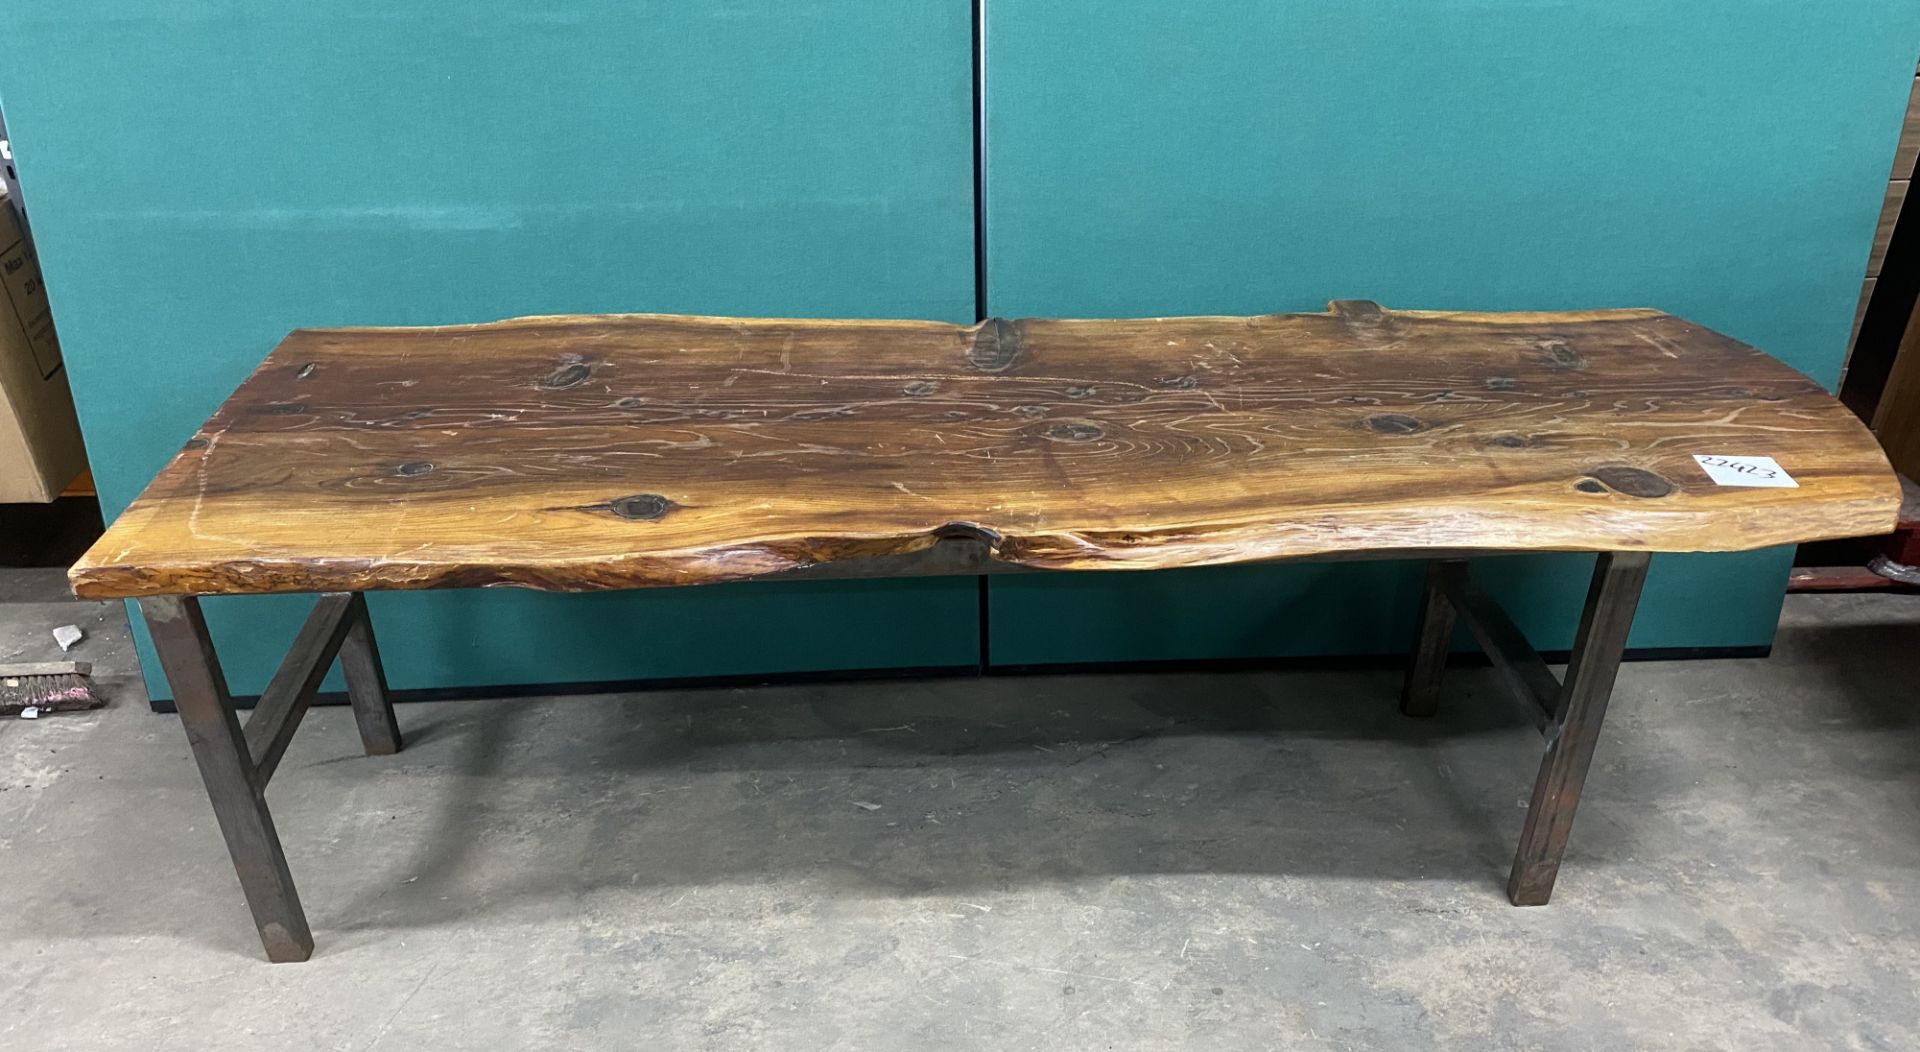 Large Rustic Wooden Dining Table On Metal Frame | 244cm x 76cm x 80cm - Image 2 of 7